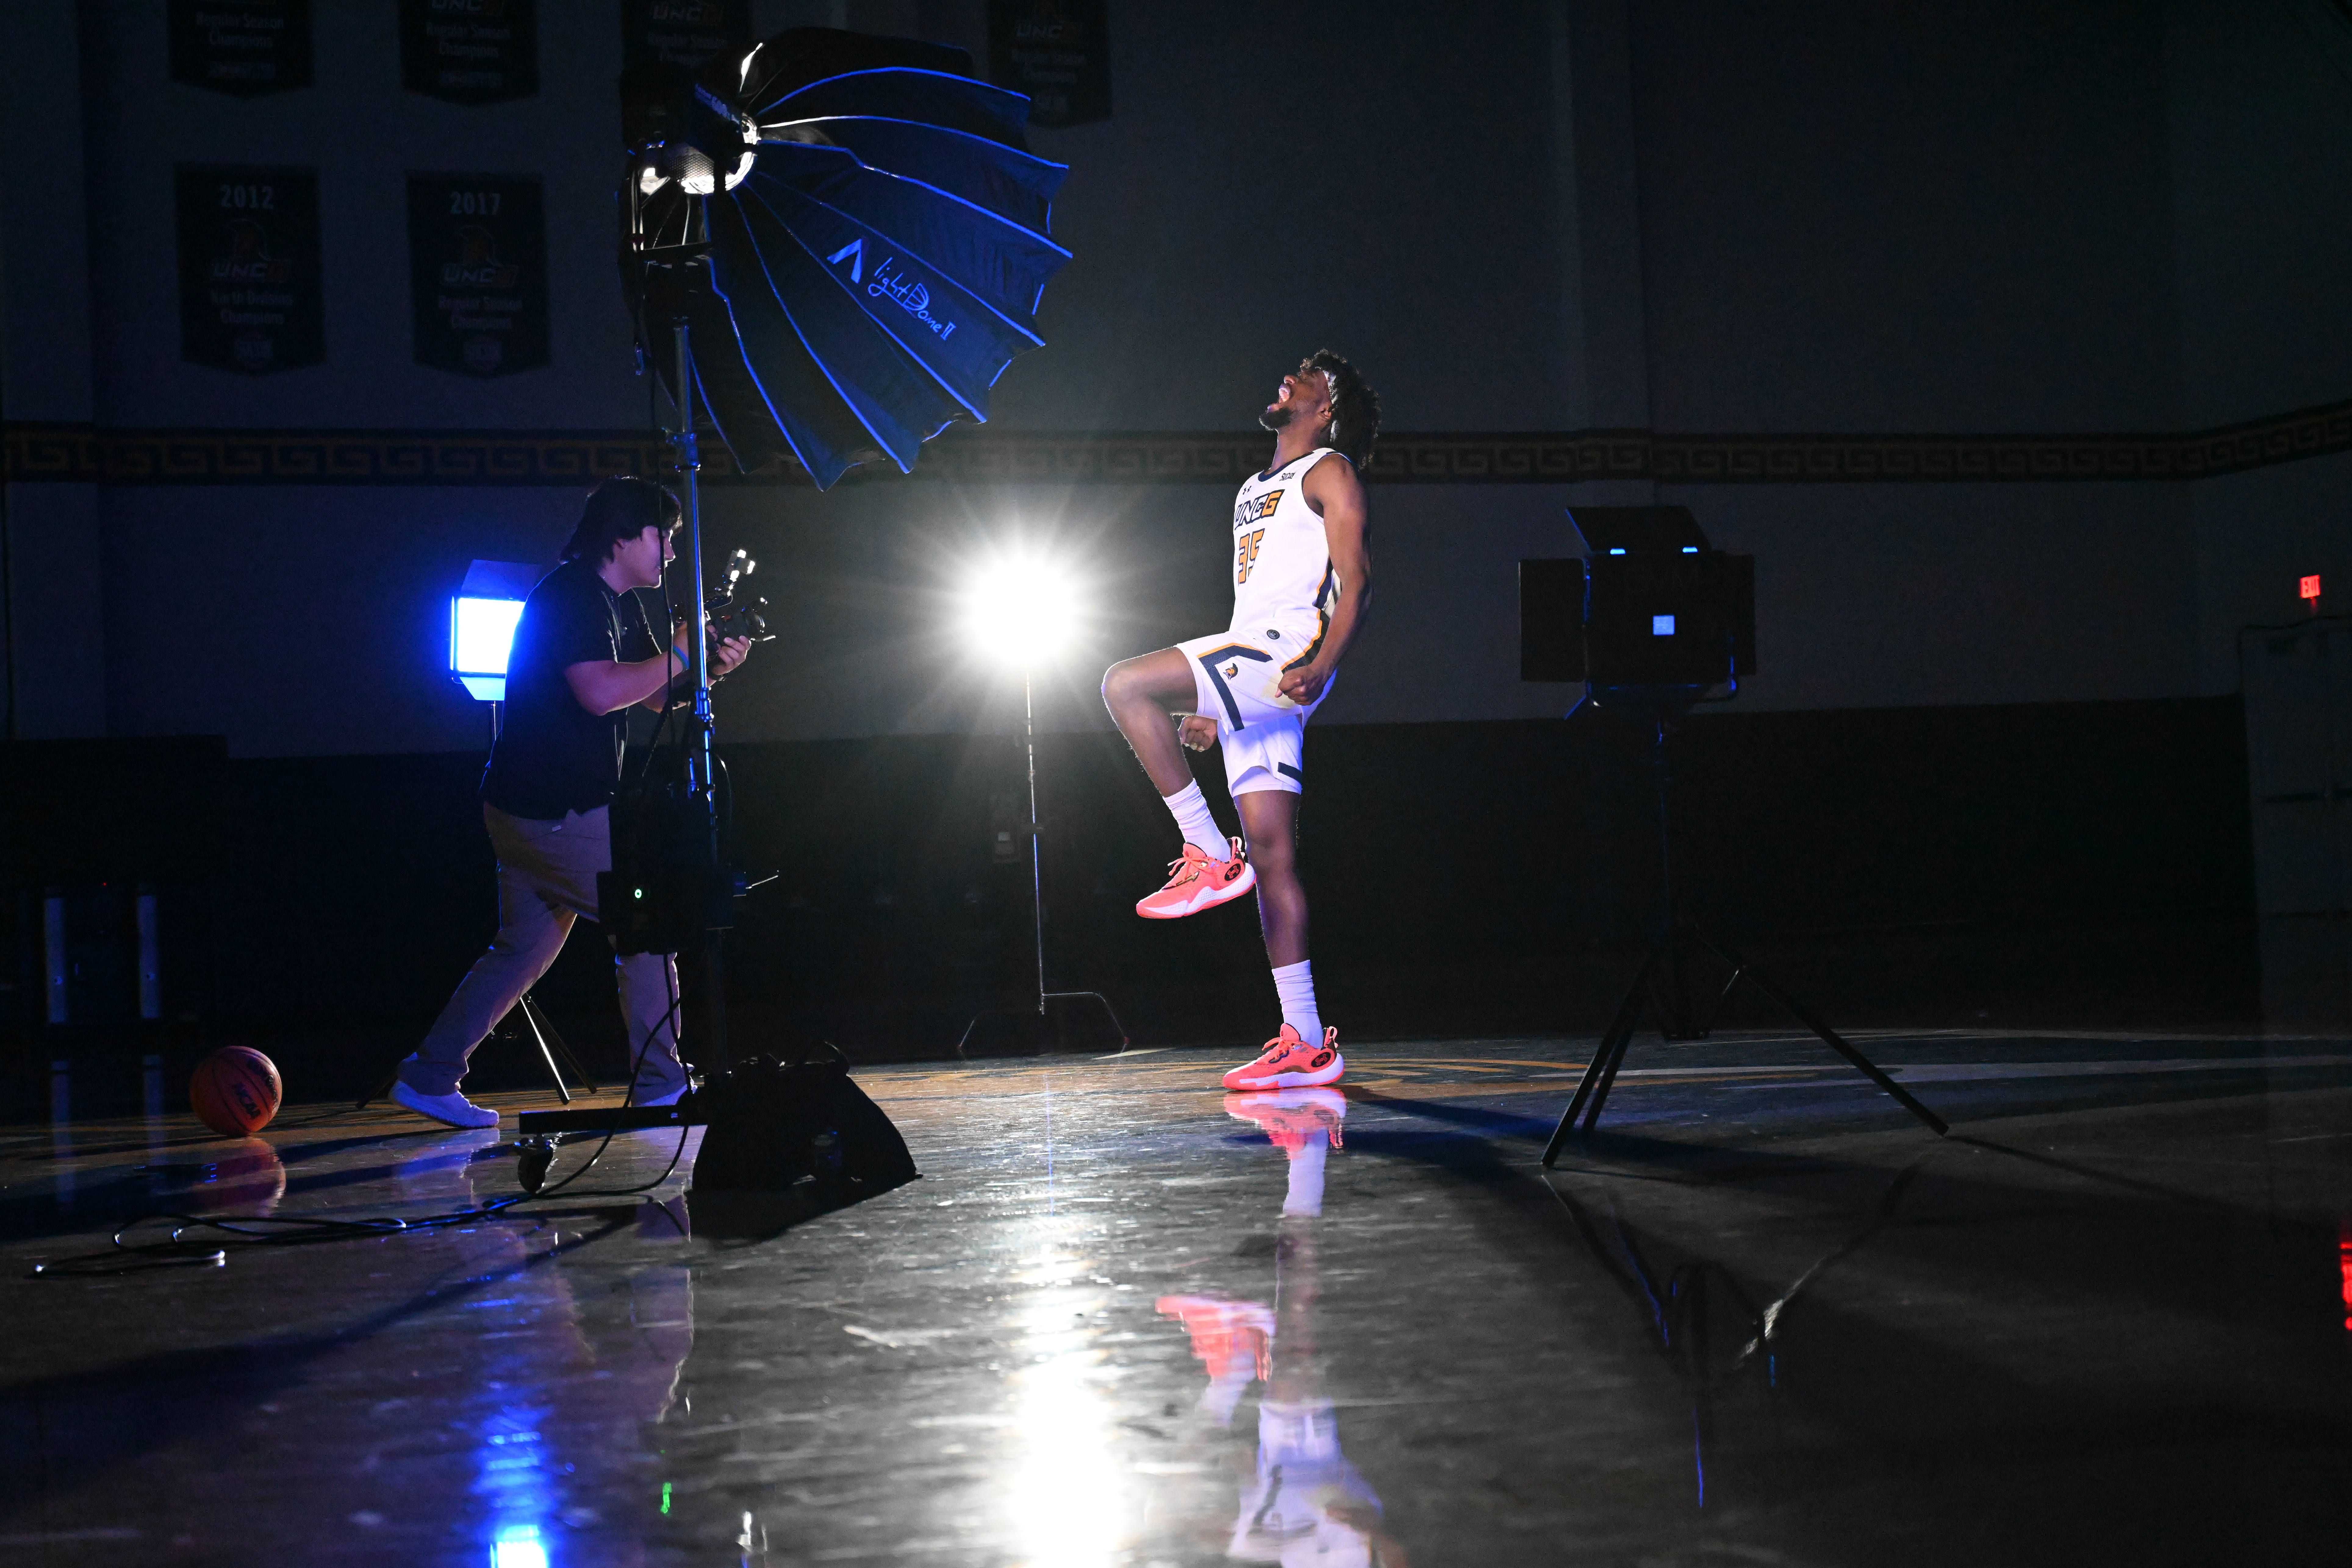 A media studies student stands behind a large camera taking video of basketball player who poses for the team's intro video.